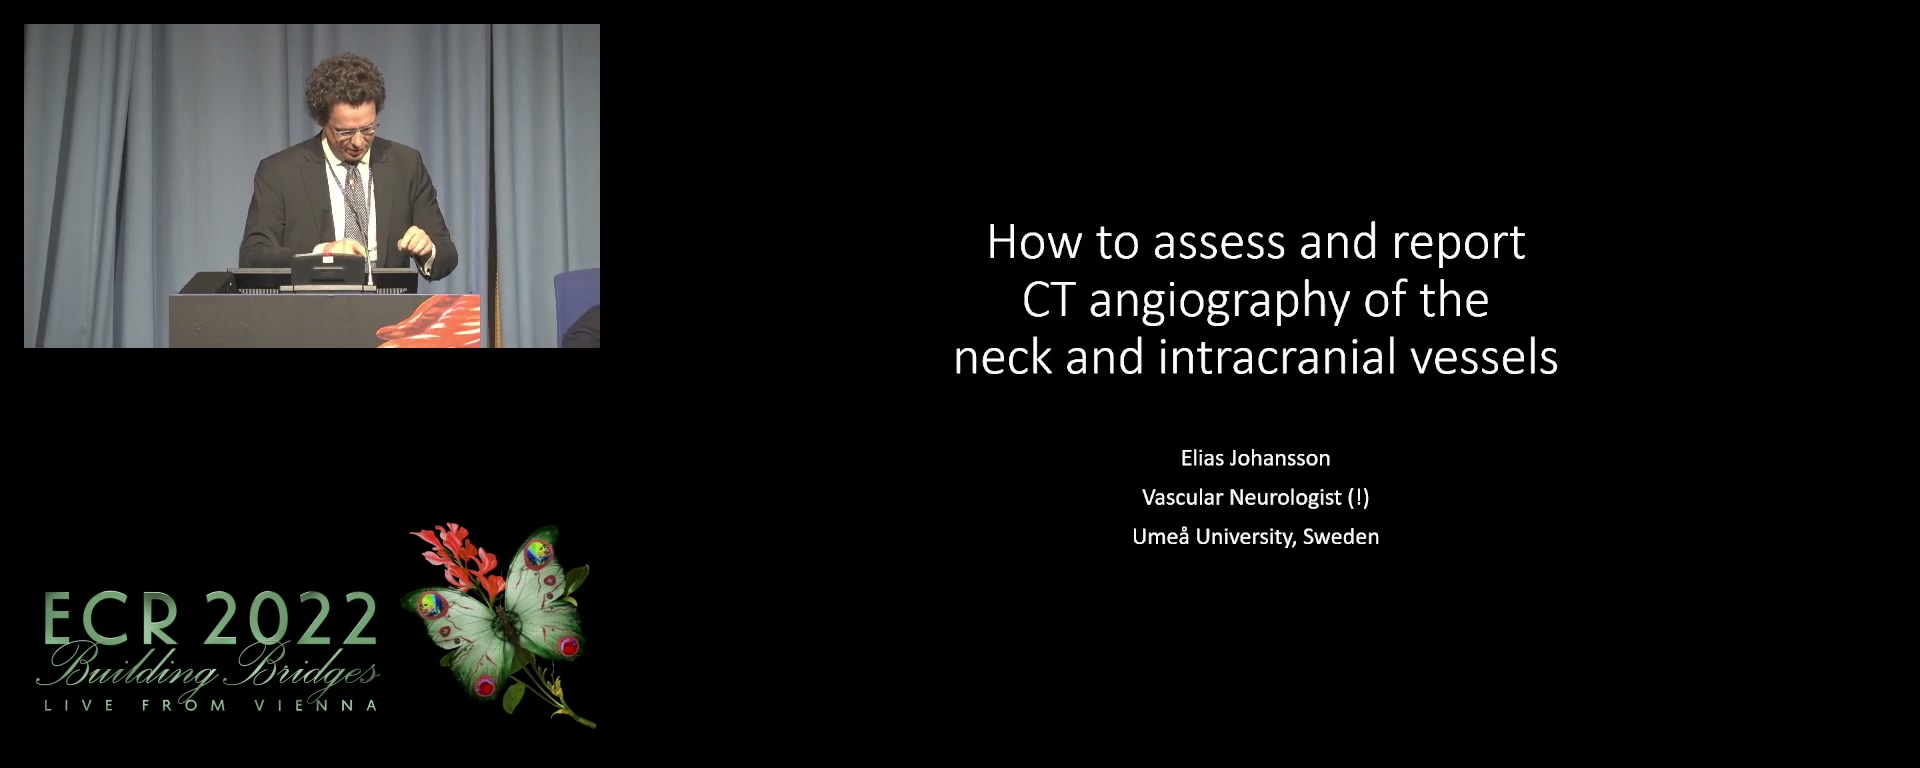 How to assess and report CT angiography of the neck and intracranial vessels